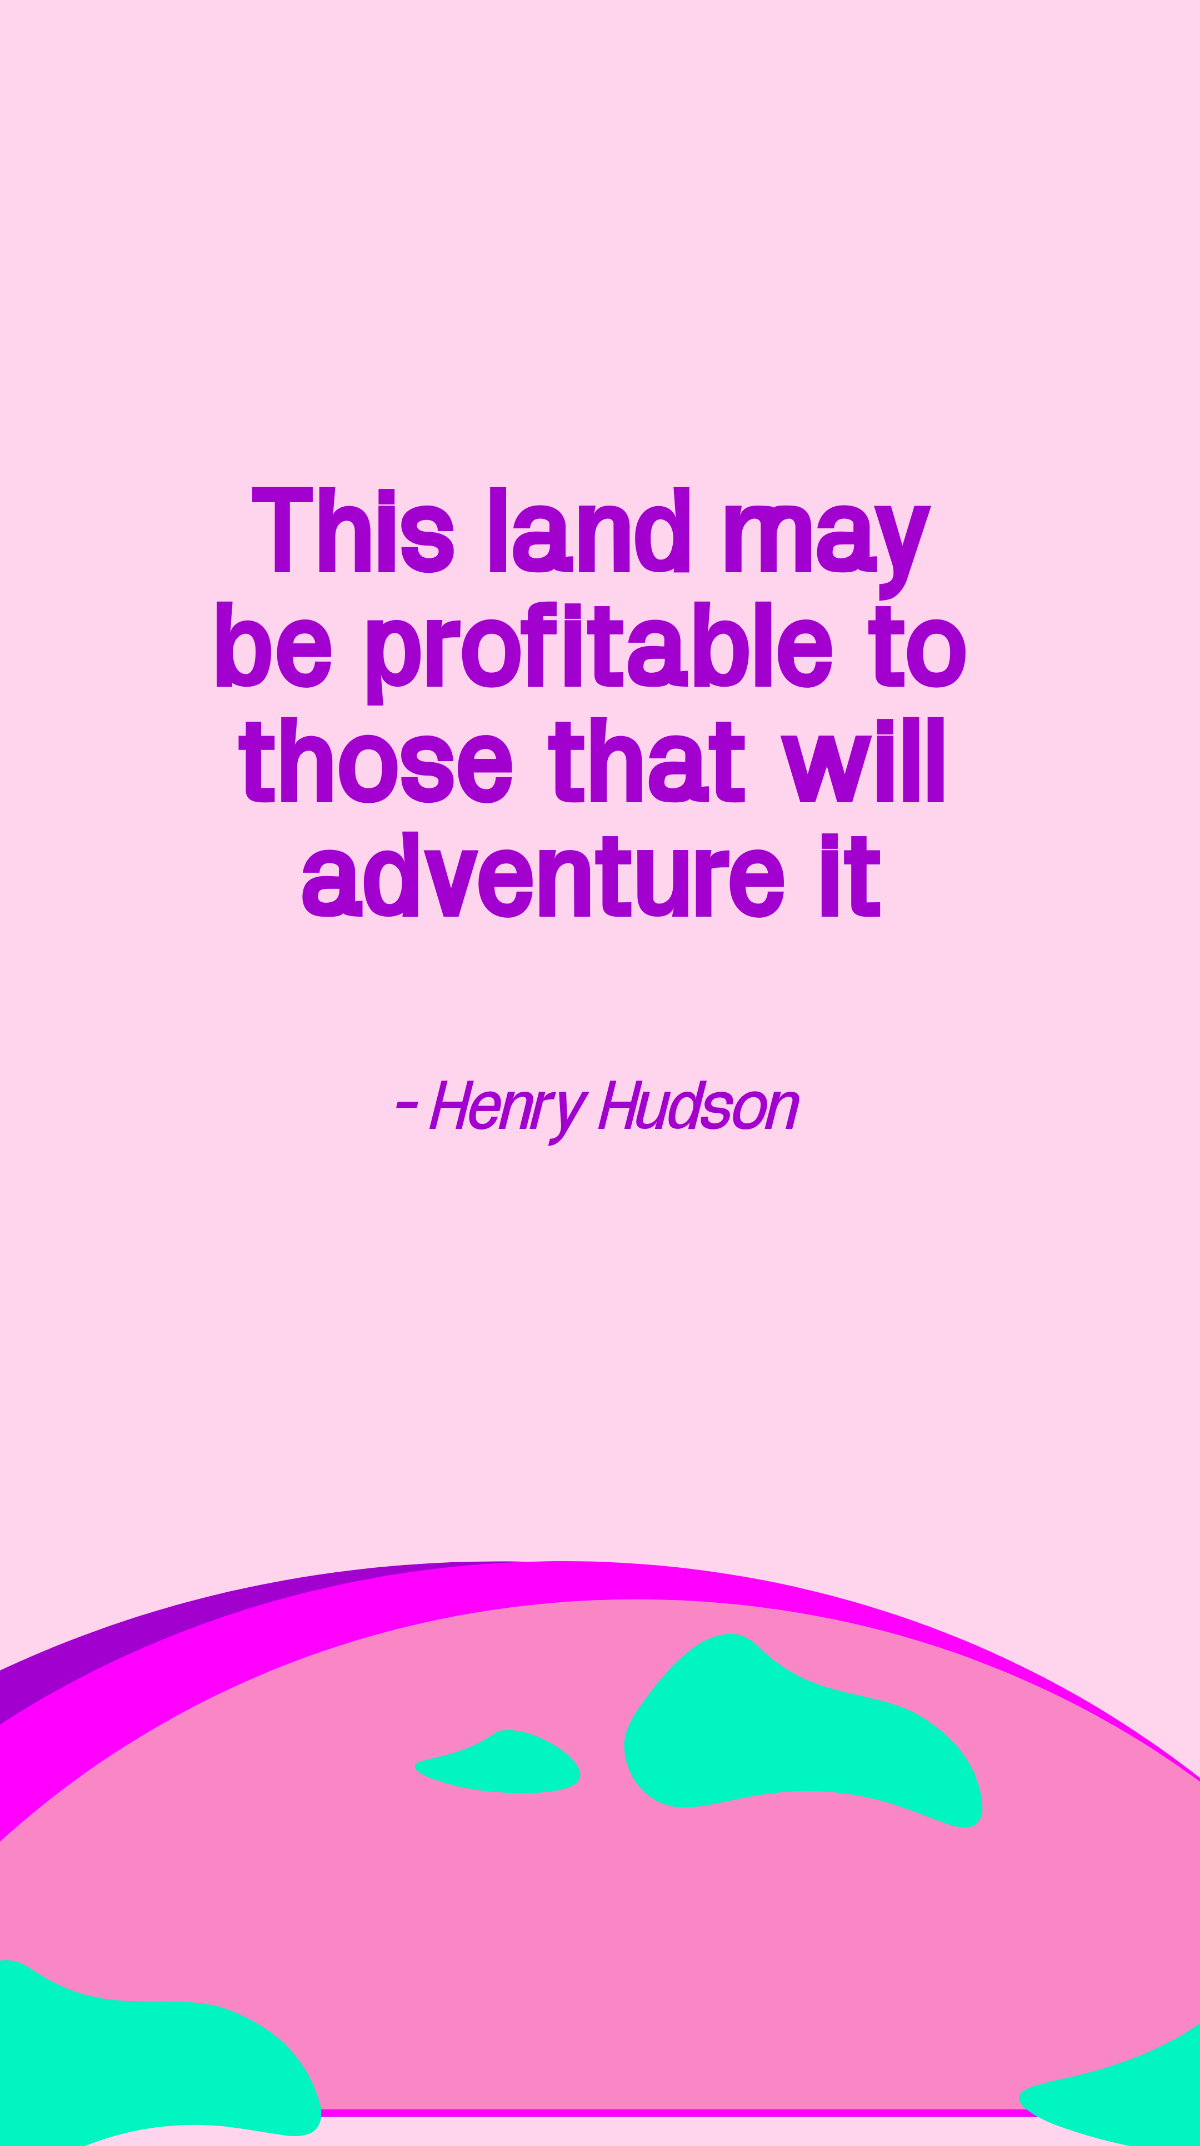 Henry Hudson - This land may be profitable to those that will adventure it Template